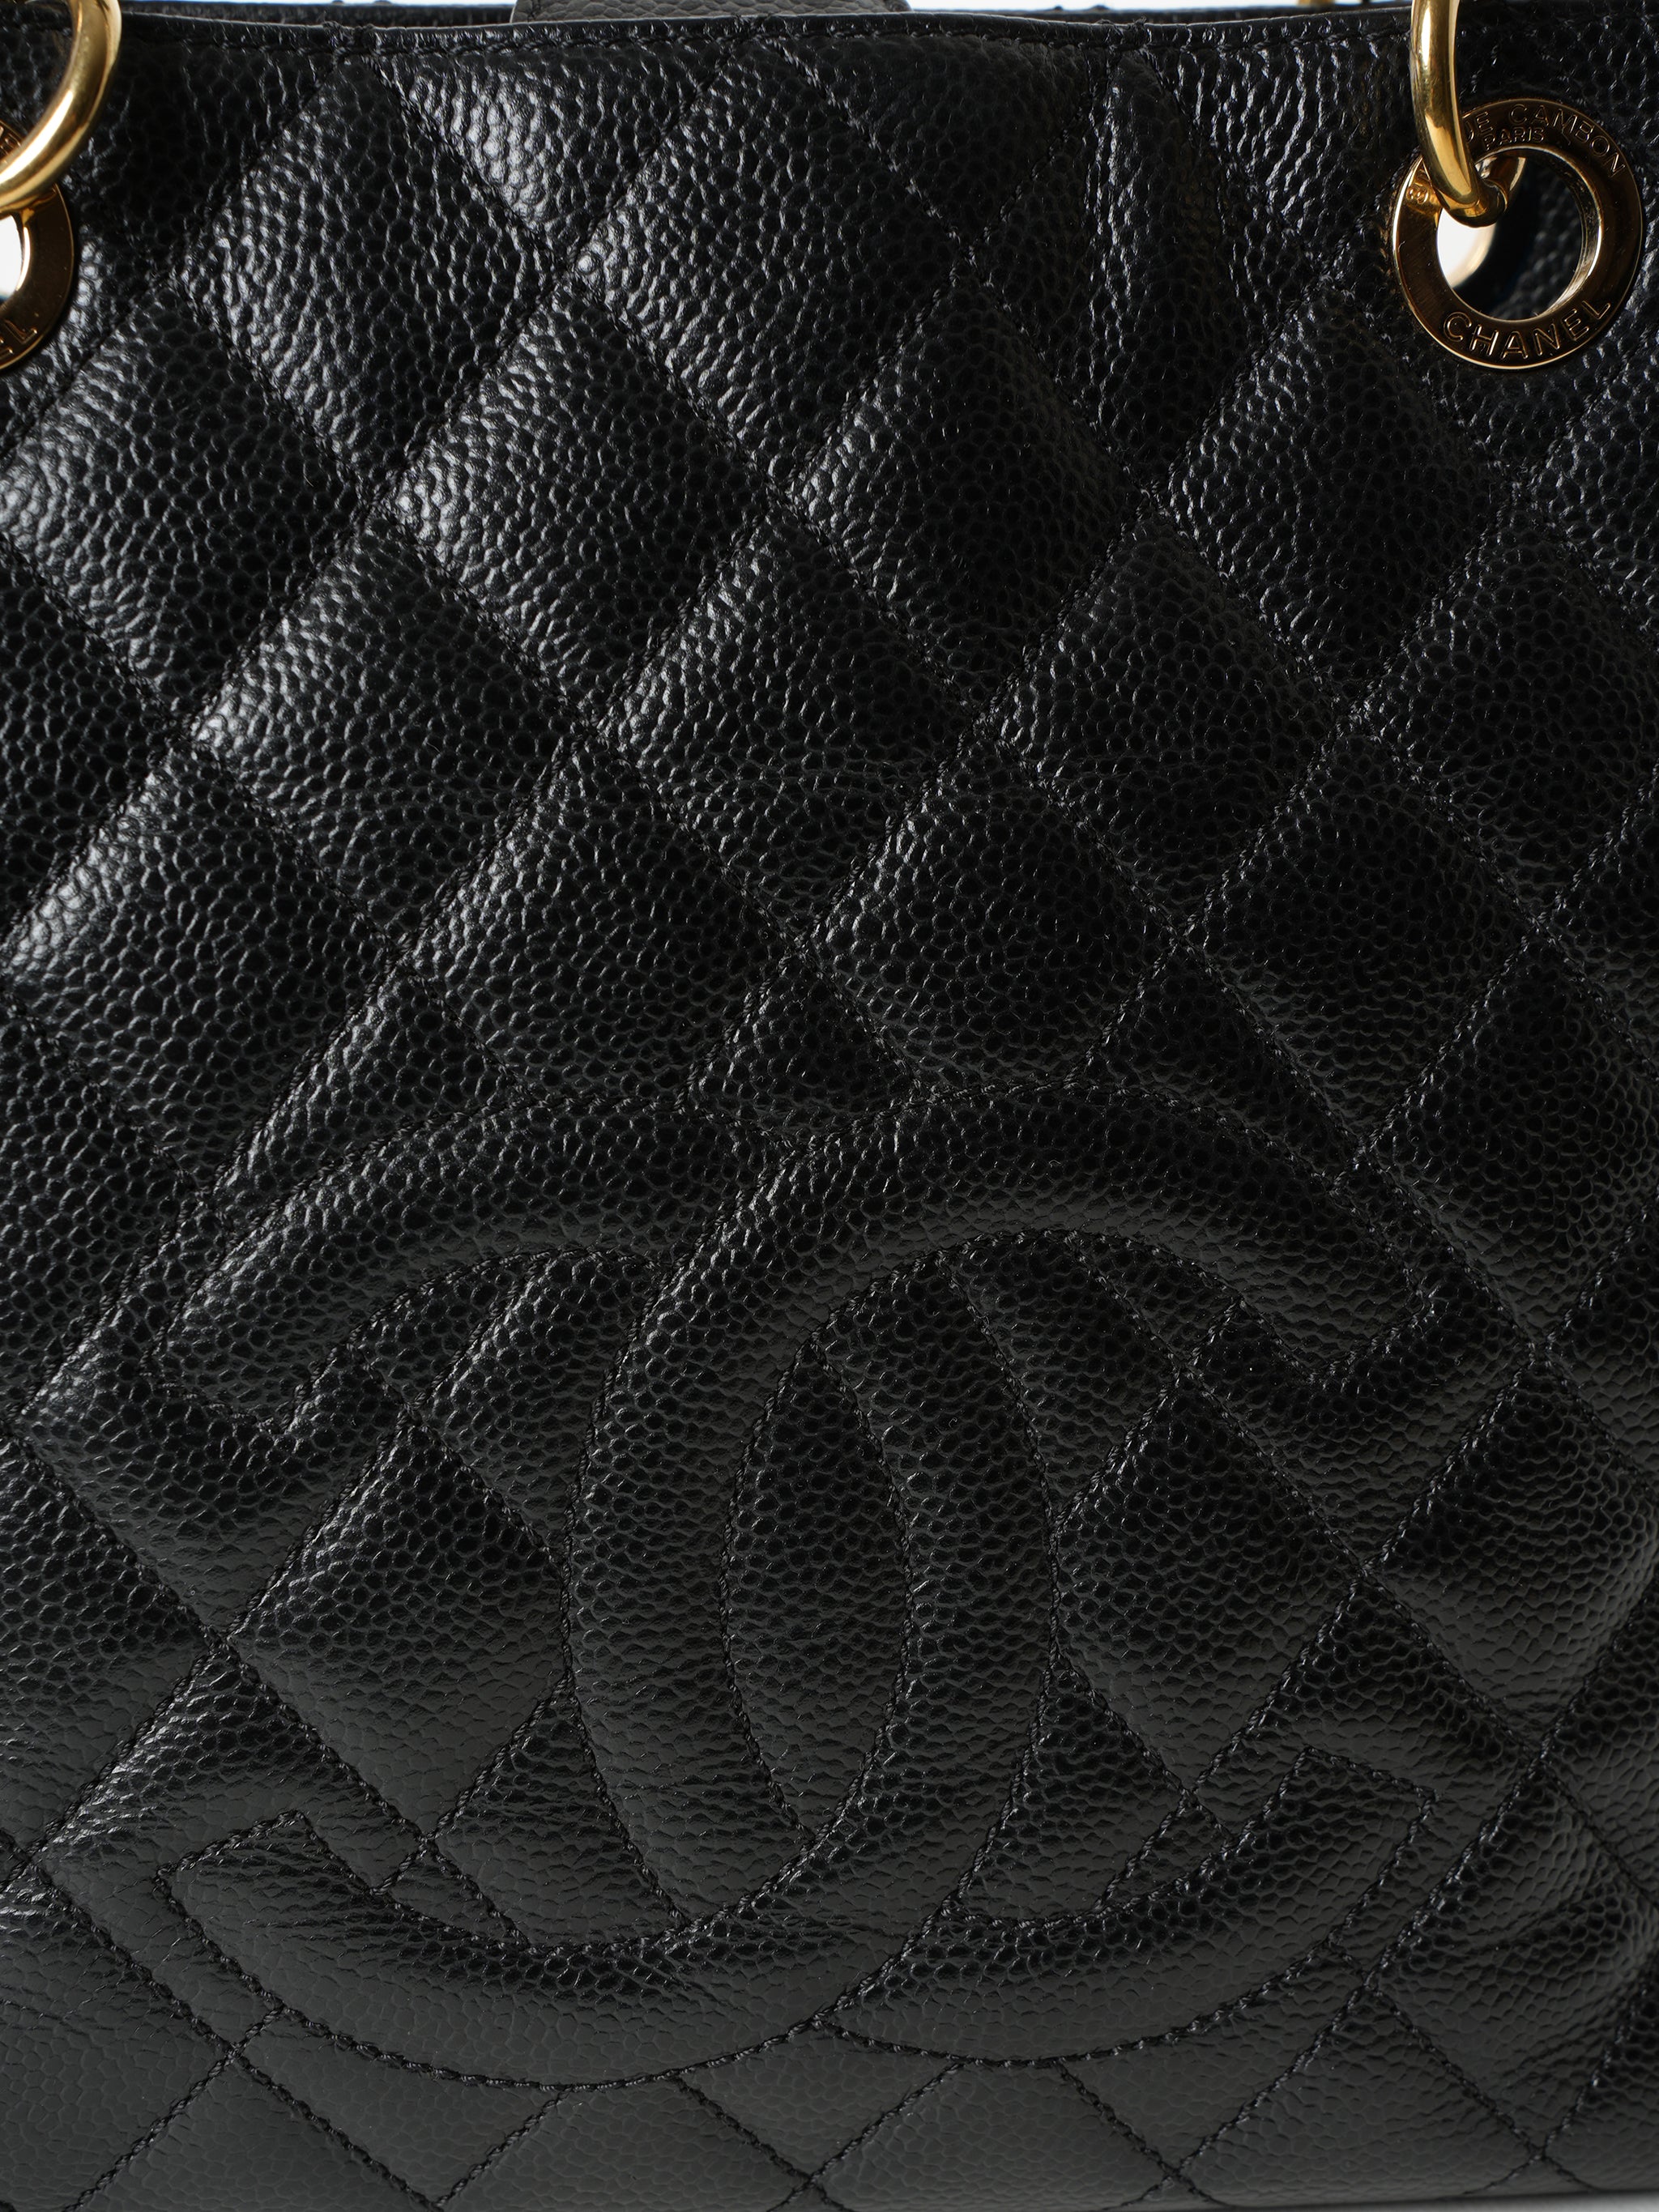 Chanel  Vintage Black Quilted Cavier PST Petite Shopping Tote